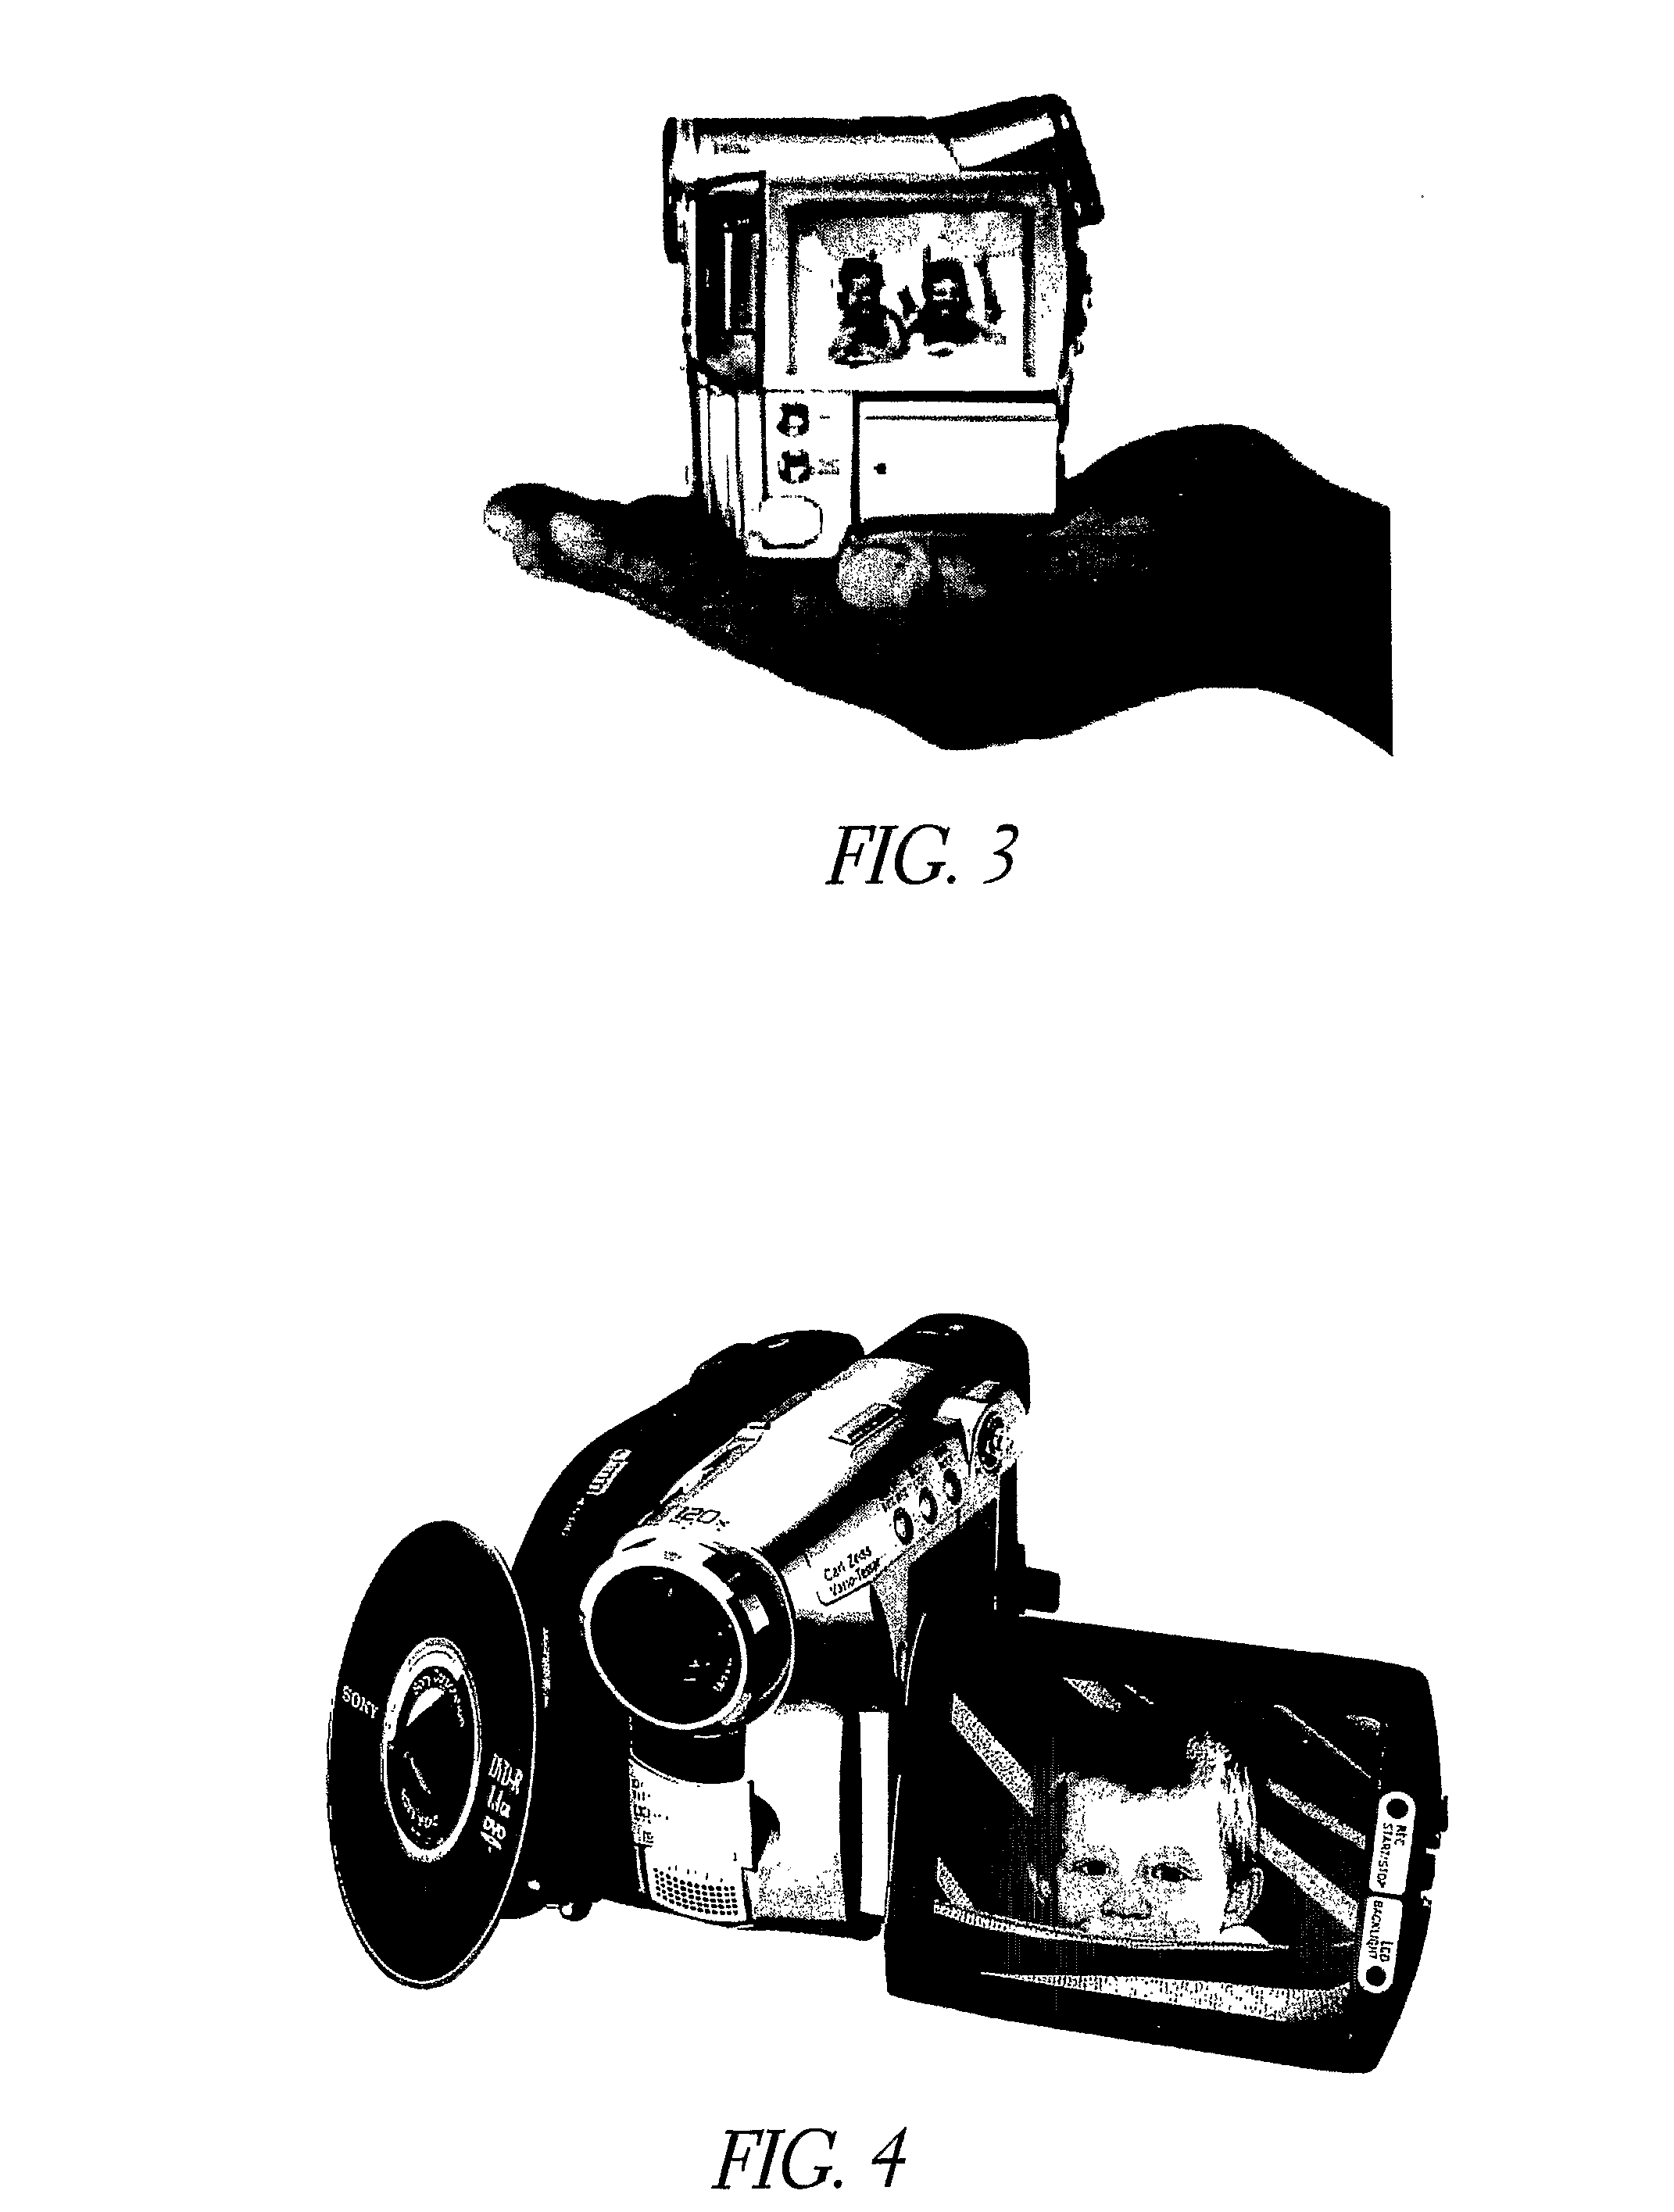 Method and apparatus for inhibiting the piracy of motion pictures